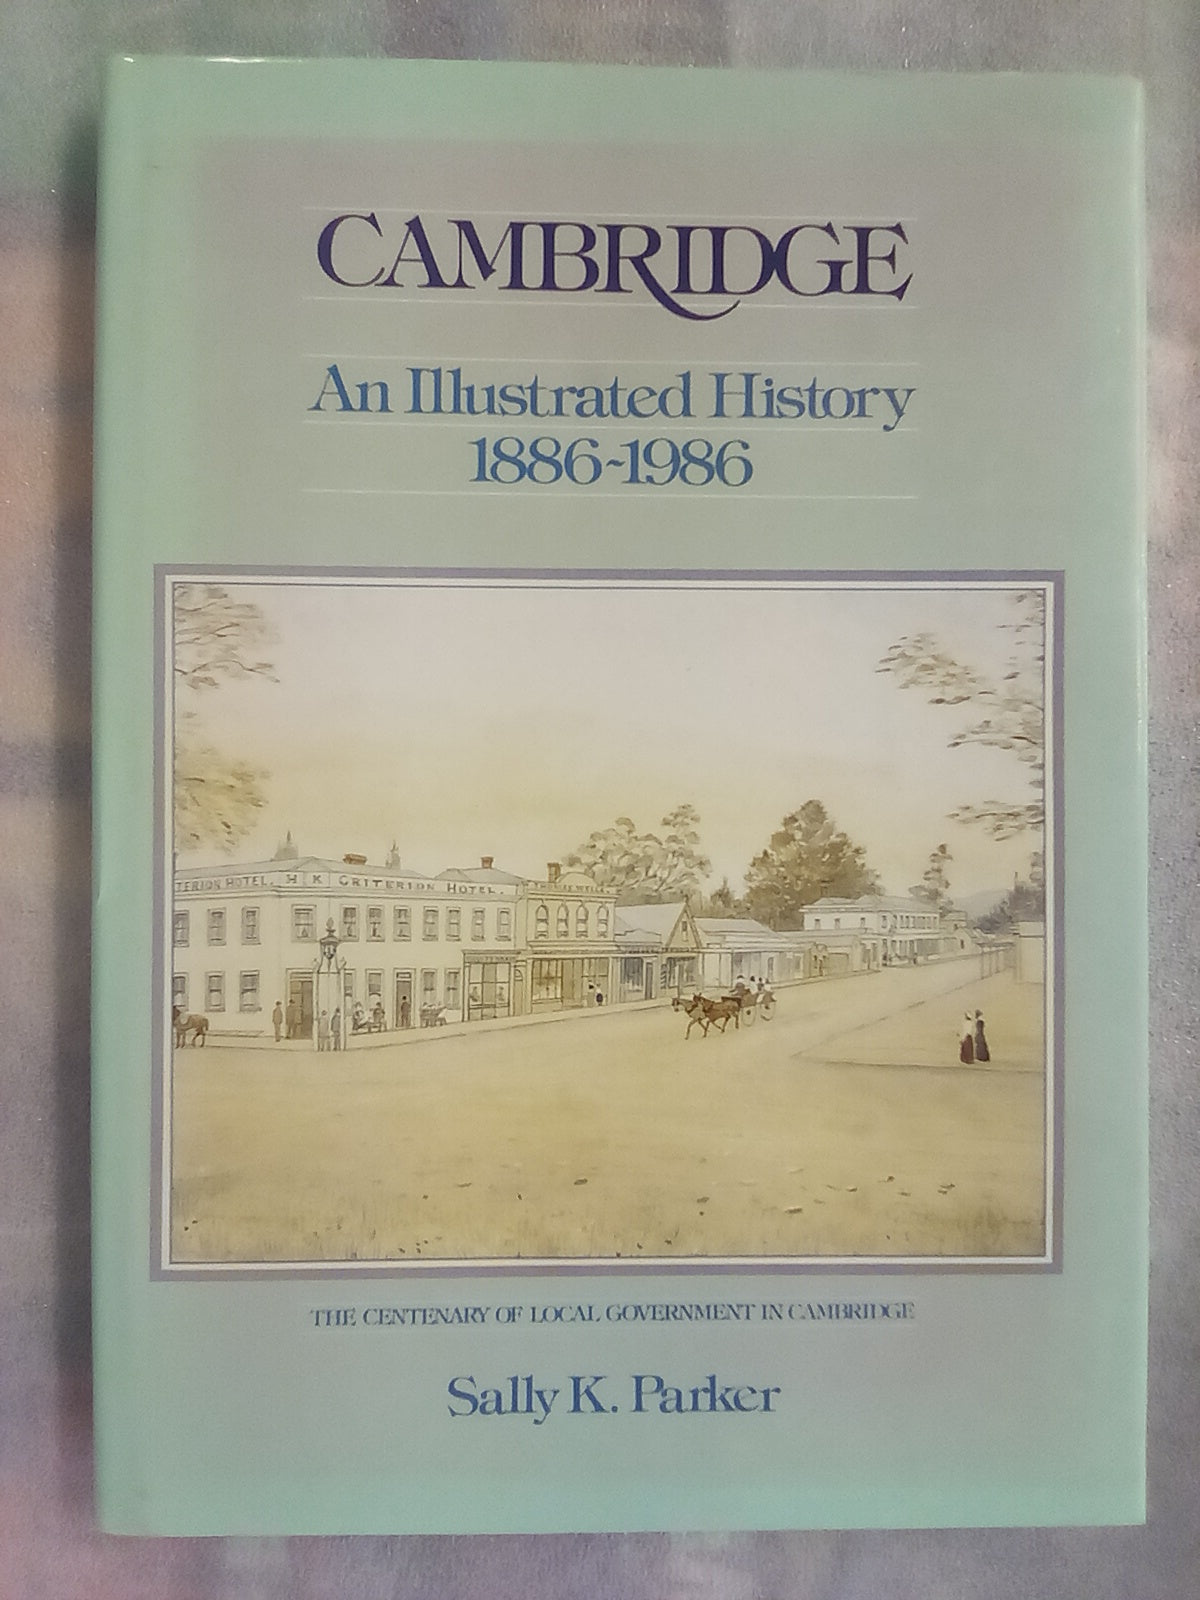 Cambridge - An Illustrated History 1886 to 1986 by Sally Parker